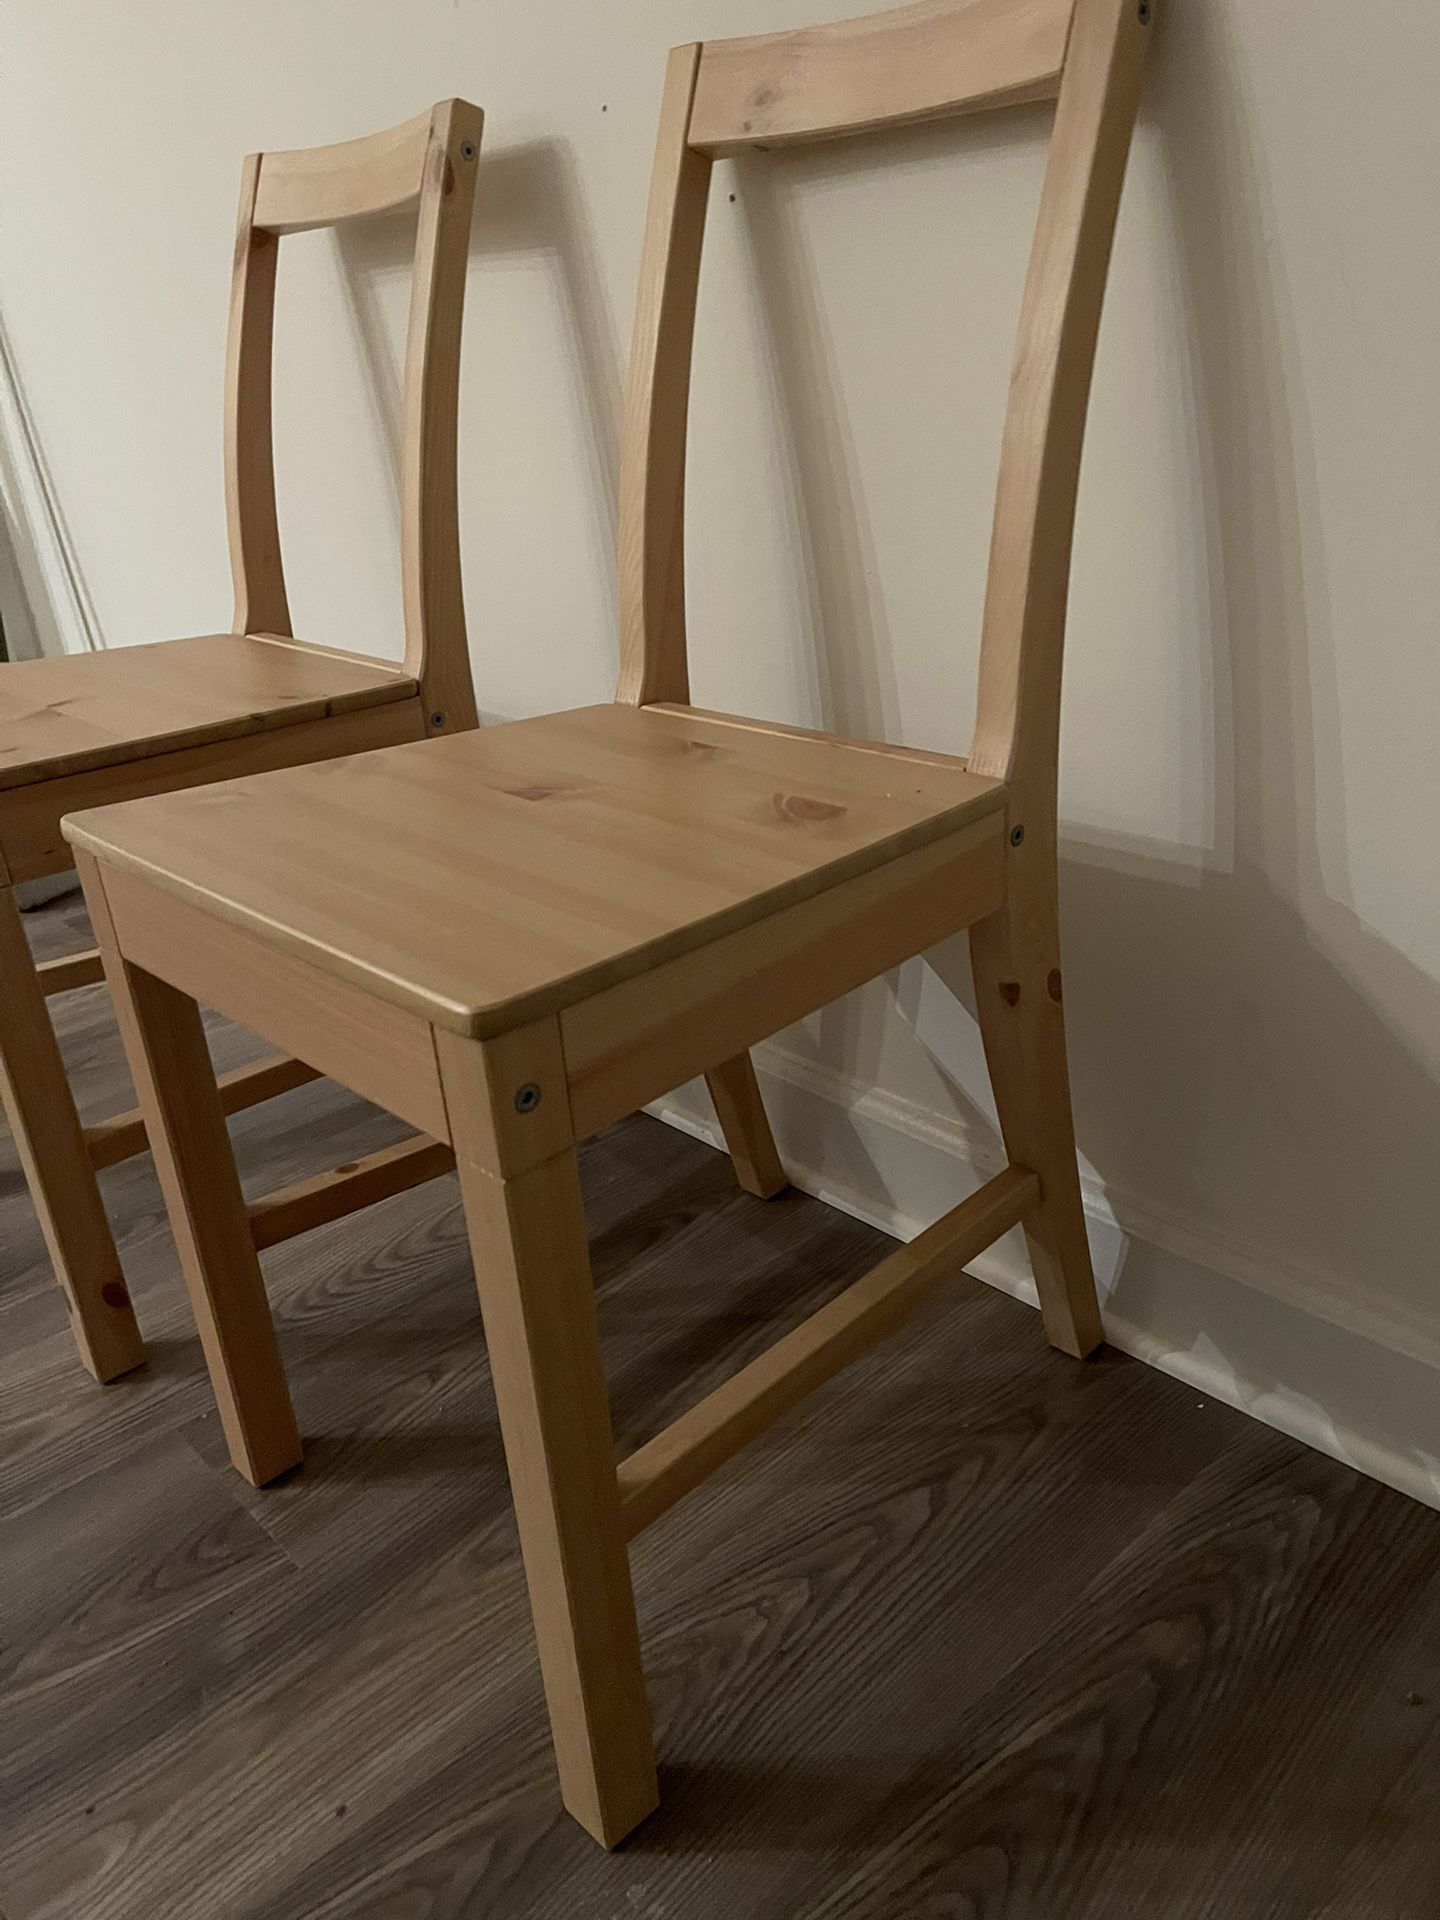 Two IKEA Chairs